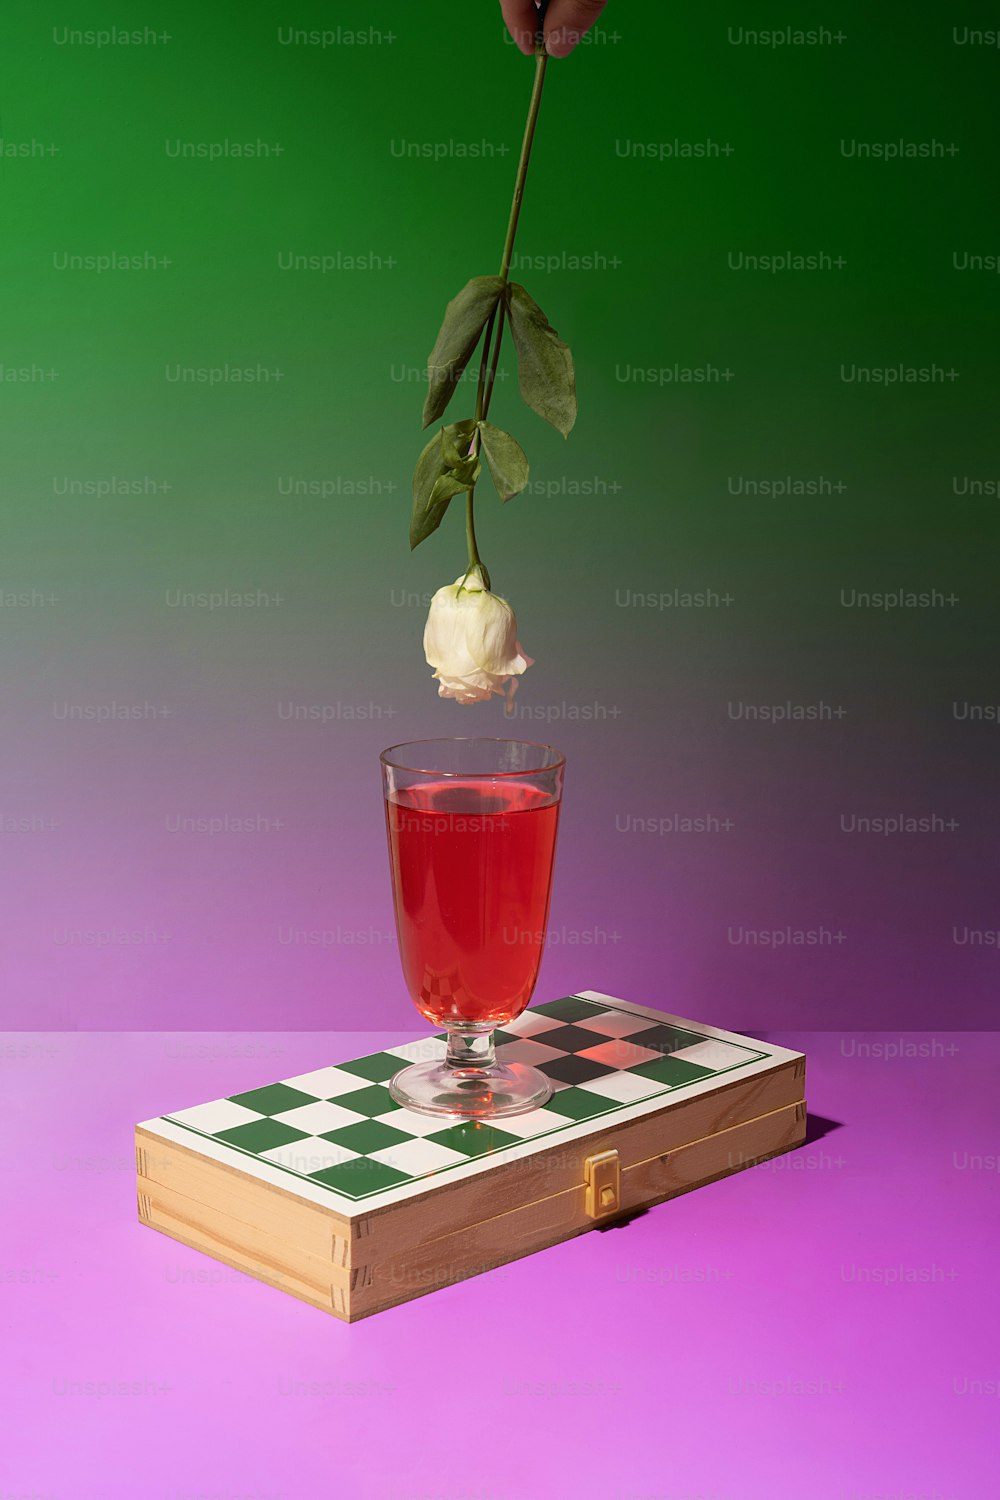 a single rose in a glass of tea on top of a book